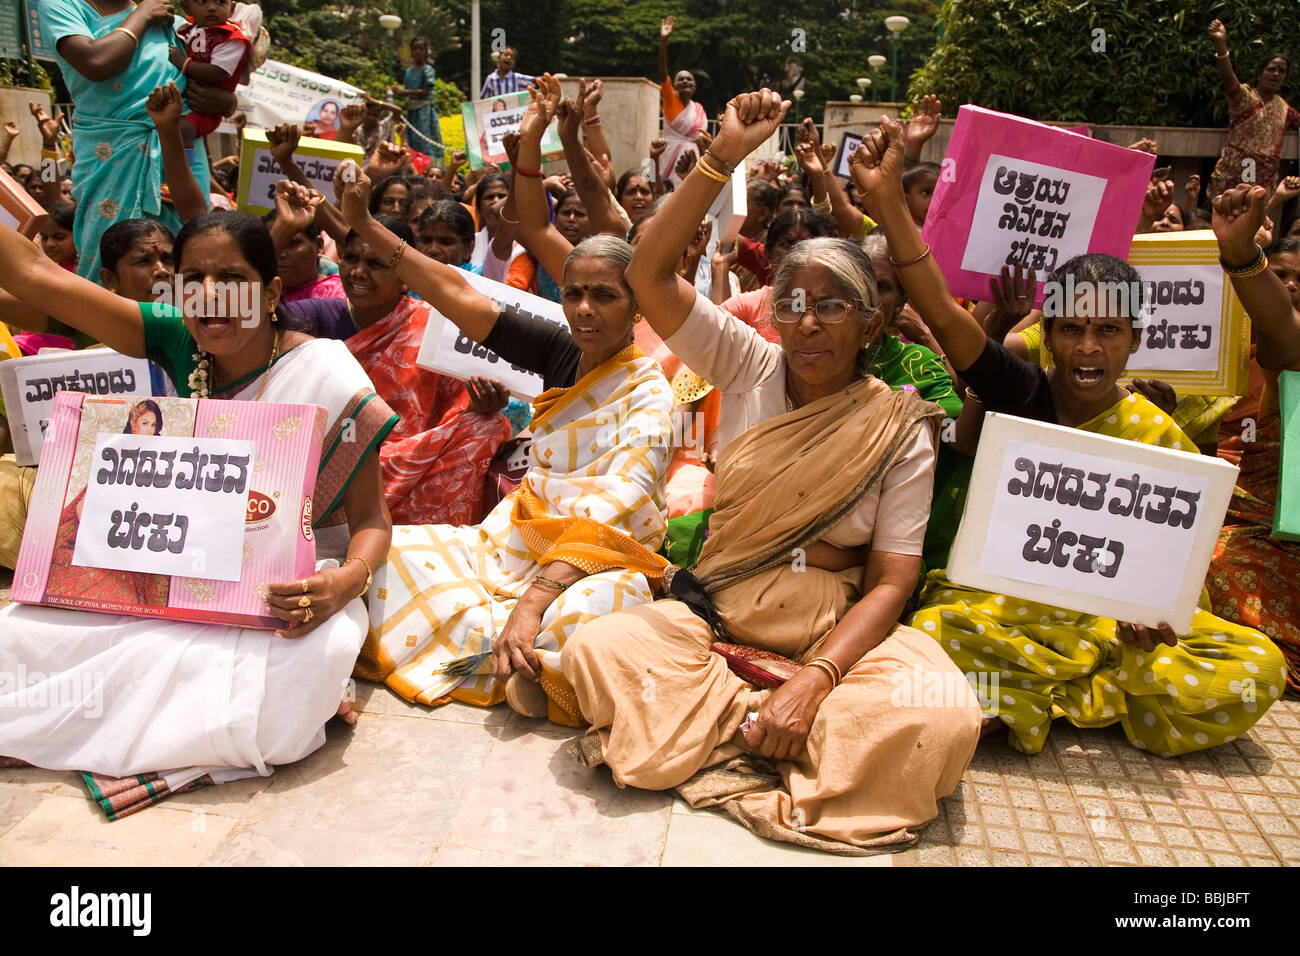 Women hold placards during a protest in Bangalore, India. The women are demostrating for women's and dalit (untouchable) rights. Stock Photo